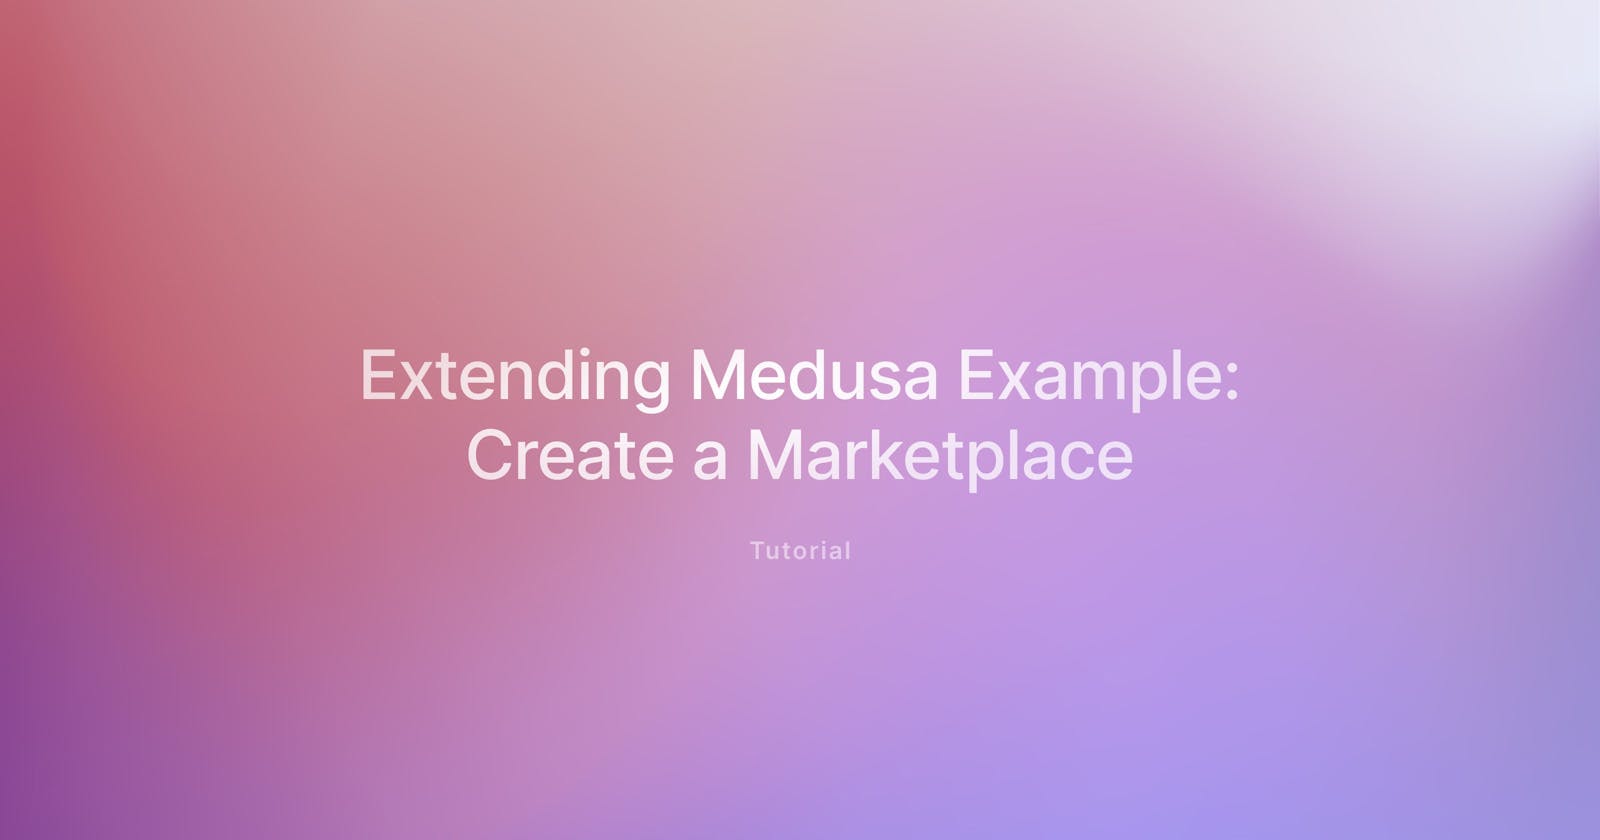 Extending Medusa Use Case: How to Build an Open Source Marketplace